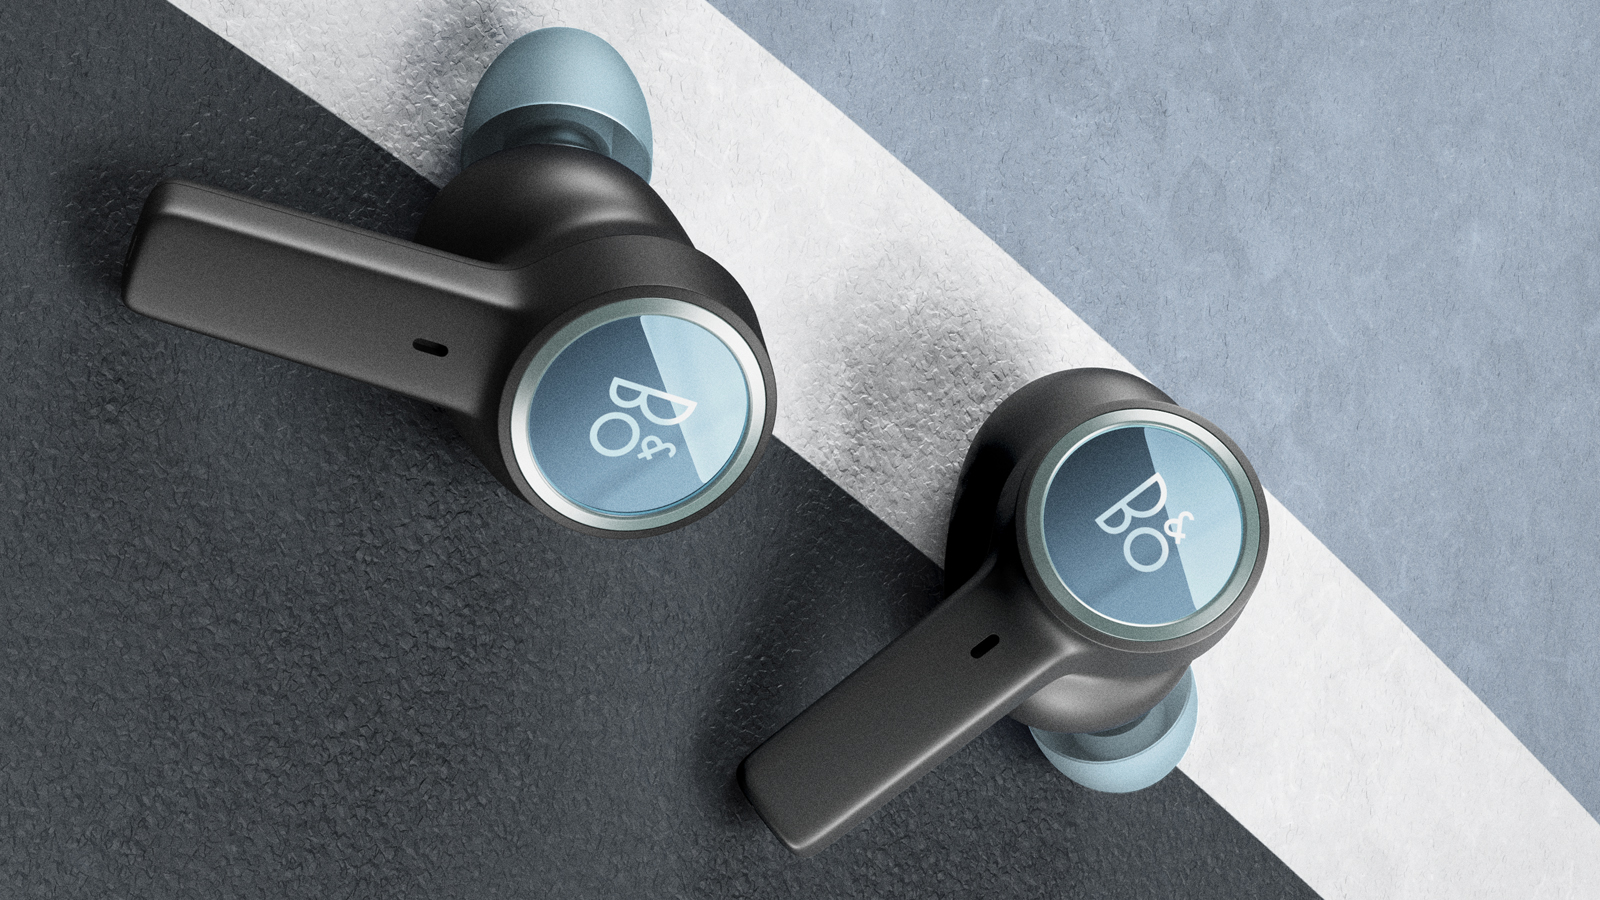 the bang & olufsen beoplay eq true wireless earbuds